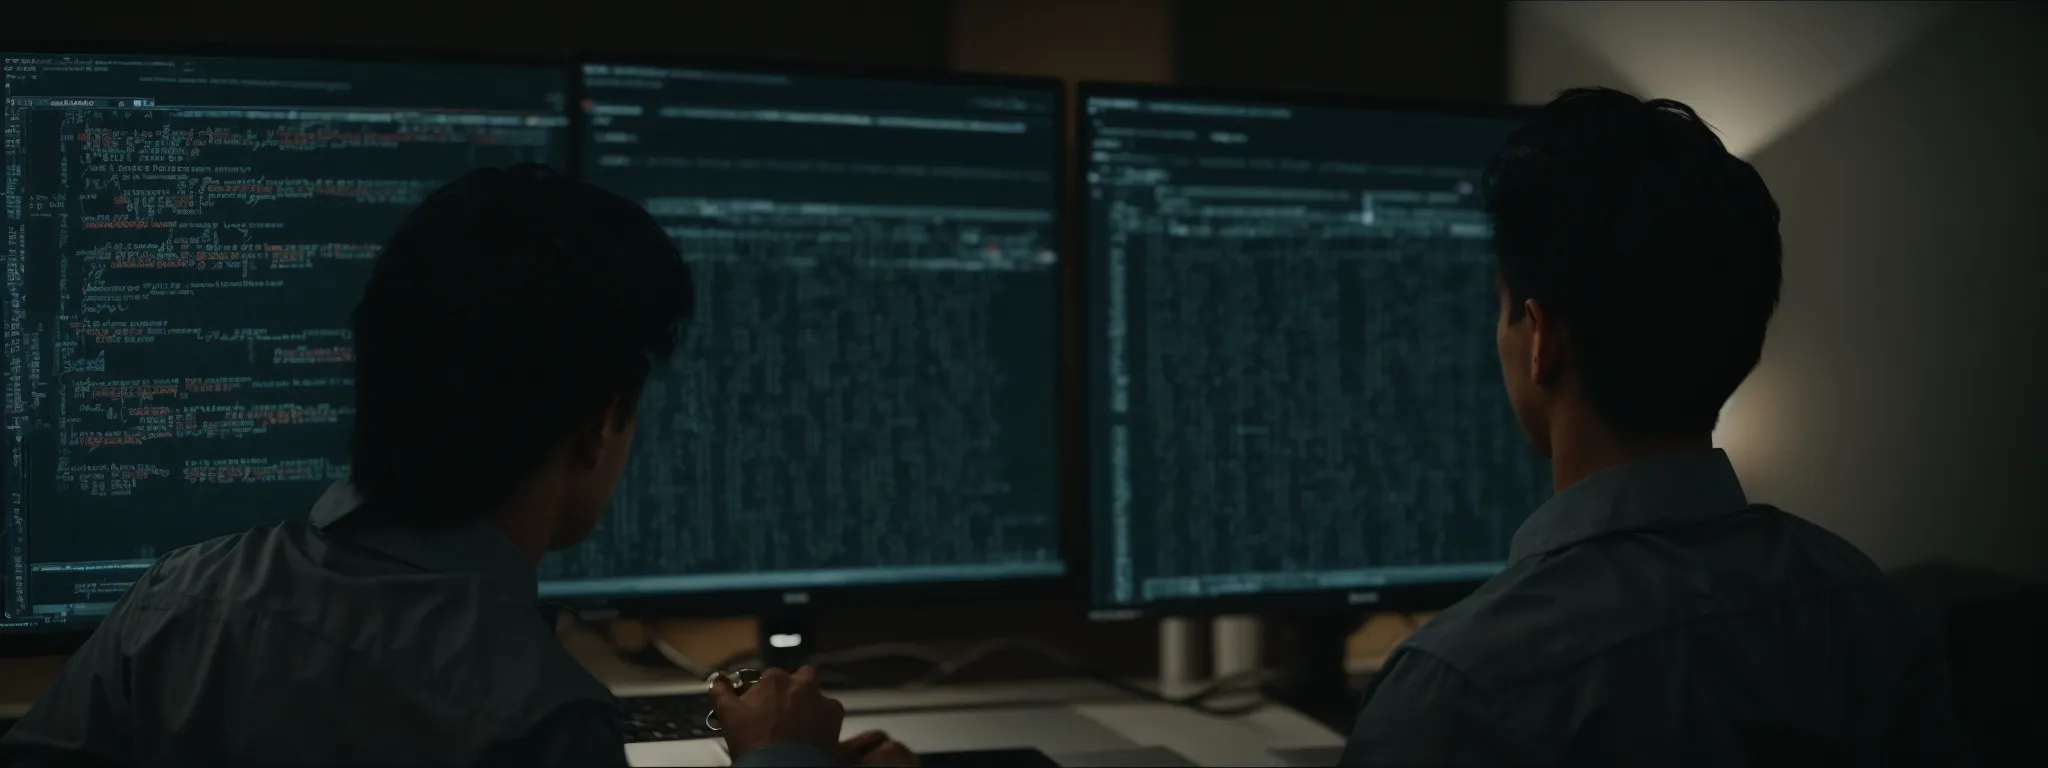 a web developer reviews lines of code on a computer screen, highlighting sections of structured data.